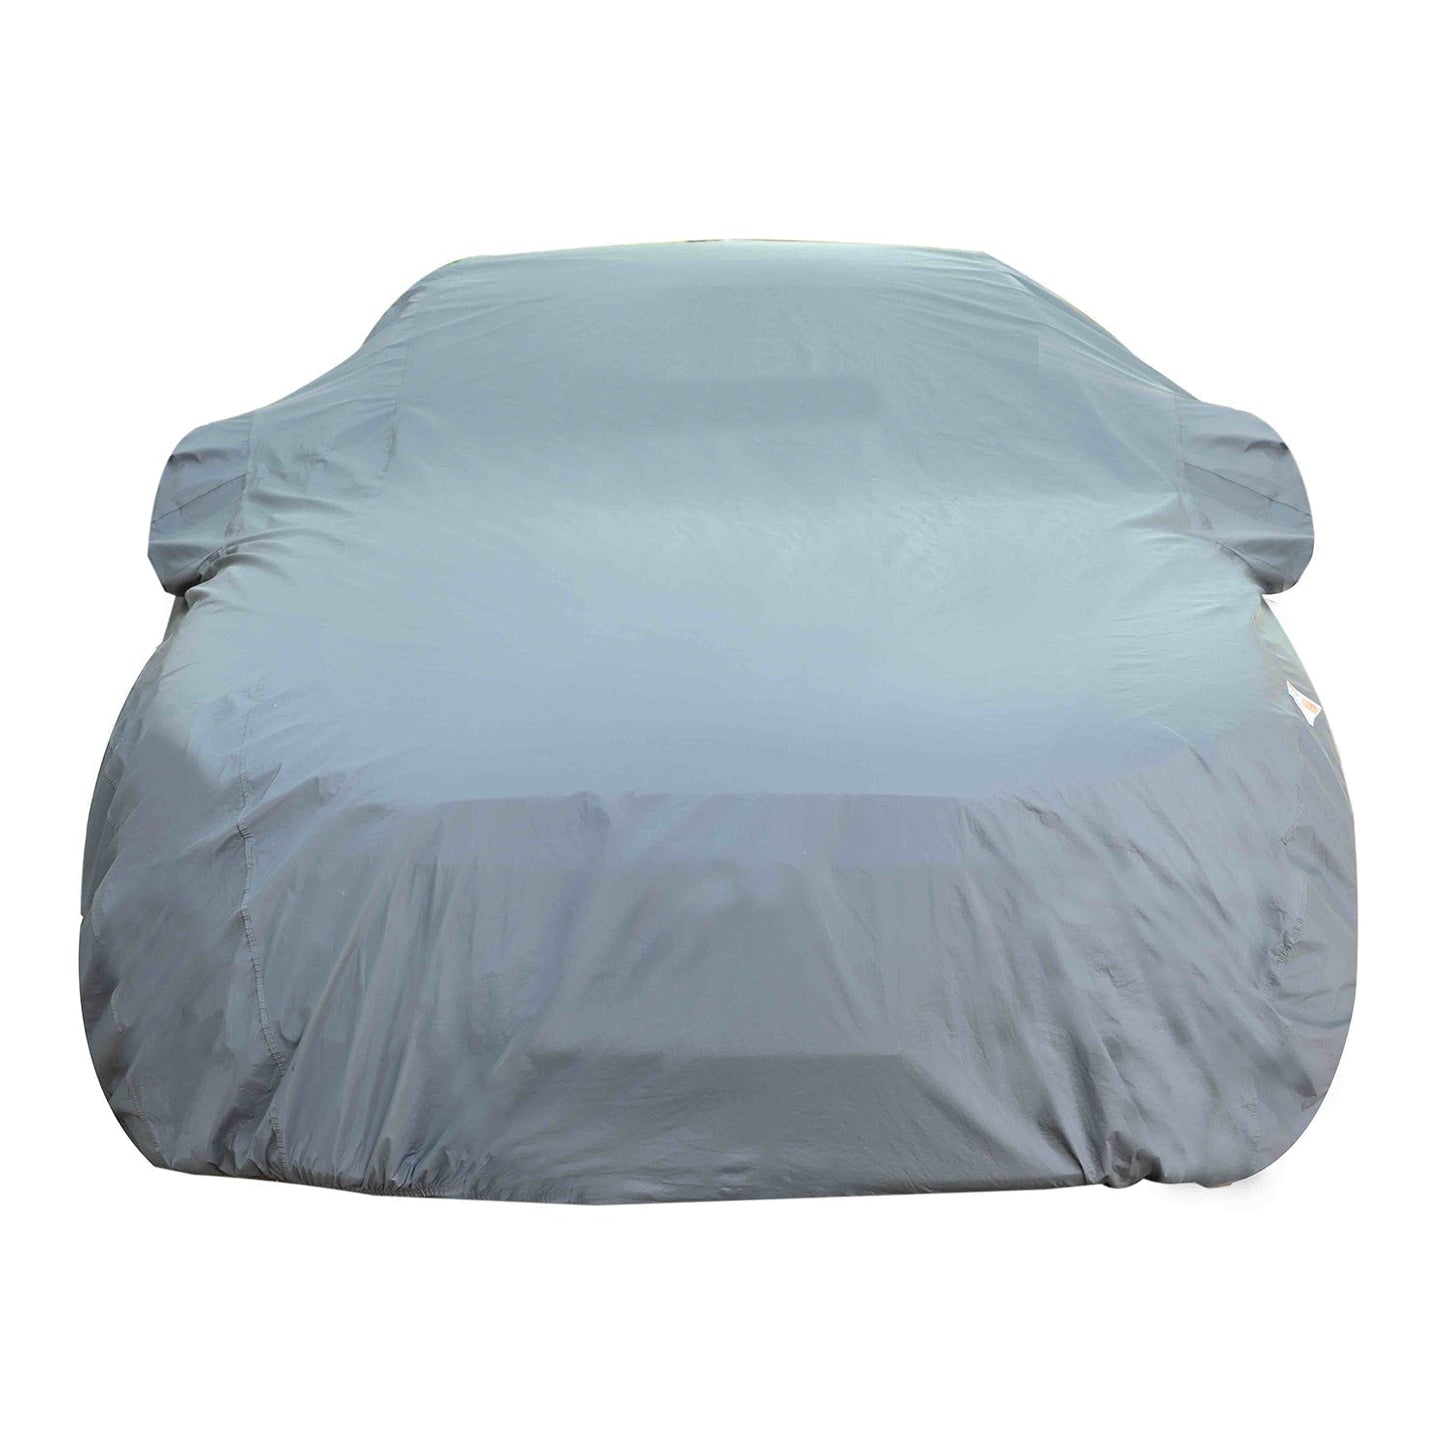 Oshotto Dark Grey 100% Anti Reflective, dustproof and Water Proof Car Body Cover with Mirror Pockets For Mitsubishi Pajero Sport